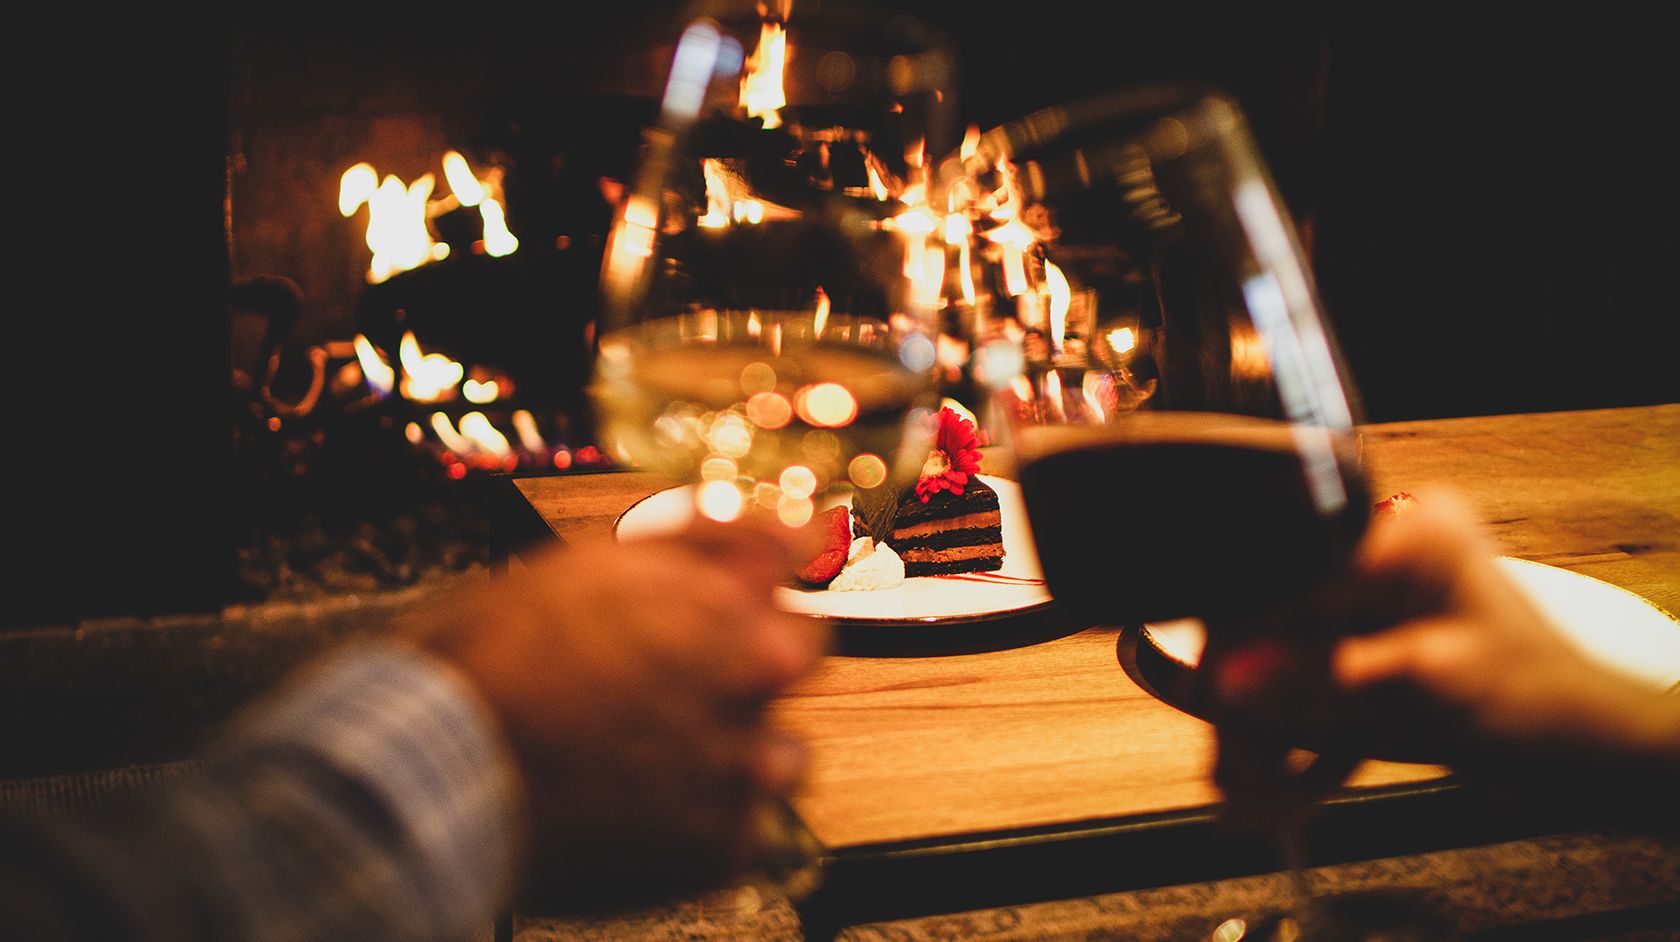 wine glasses in front of fire place